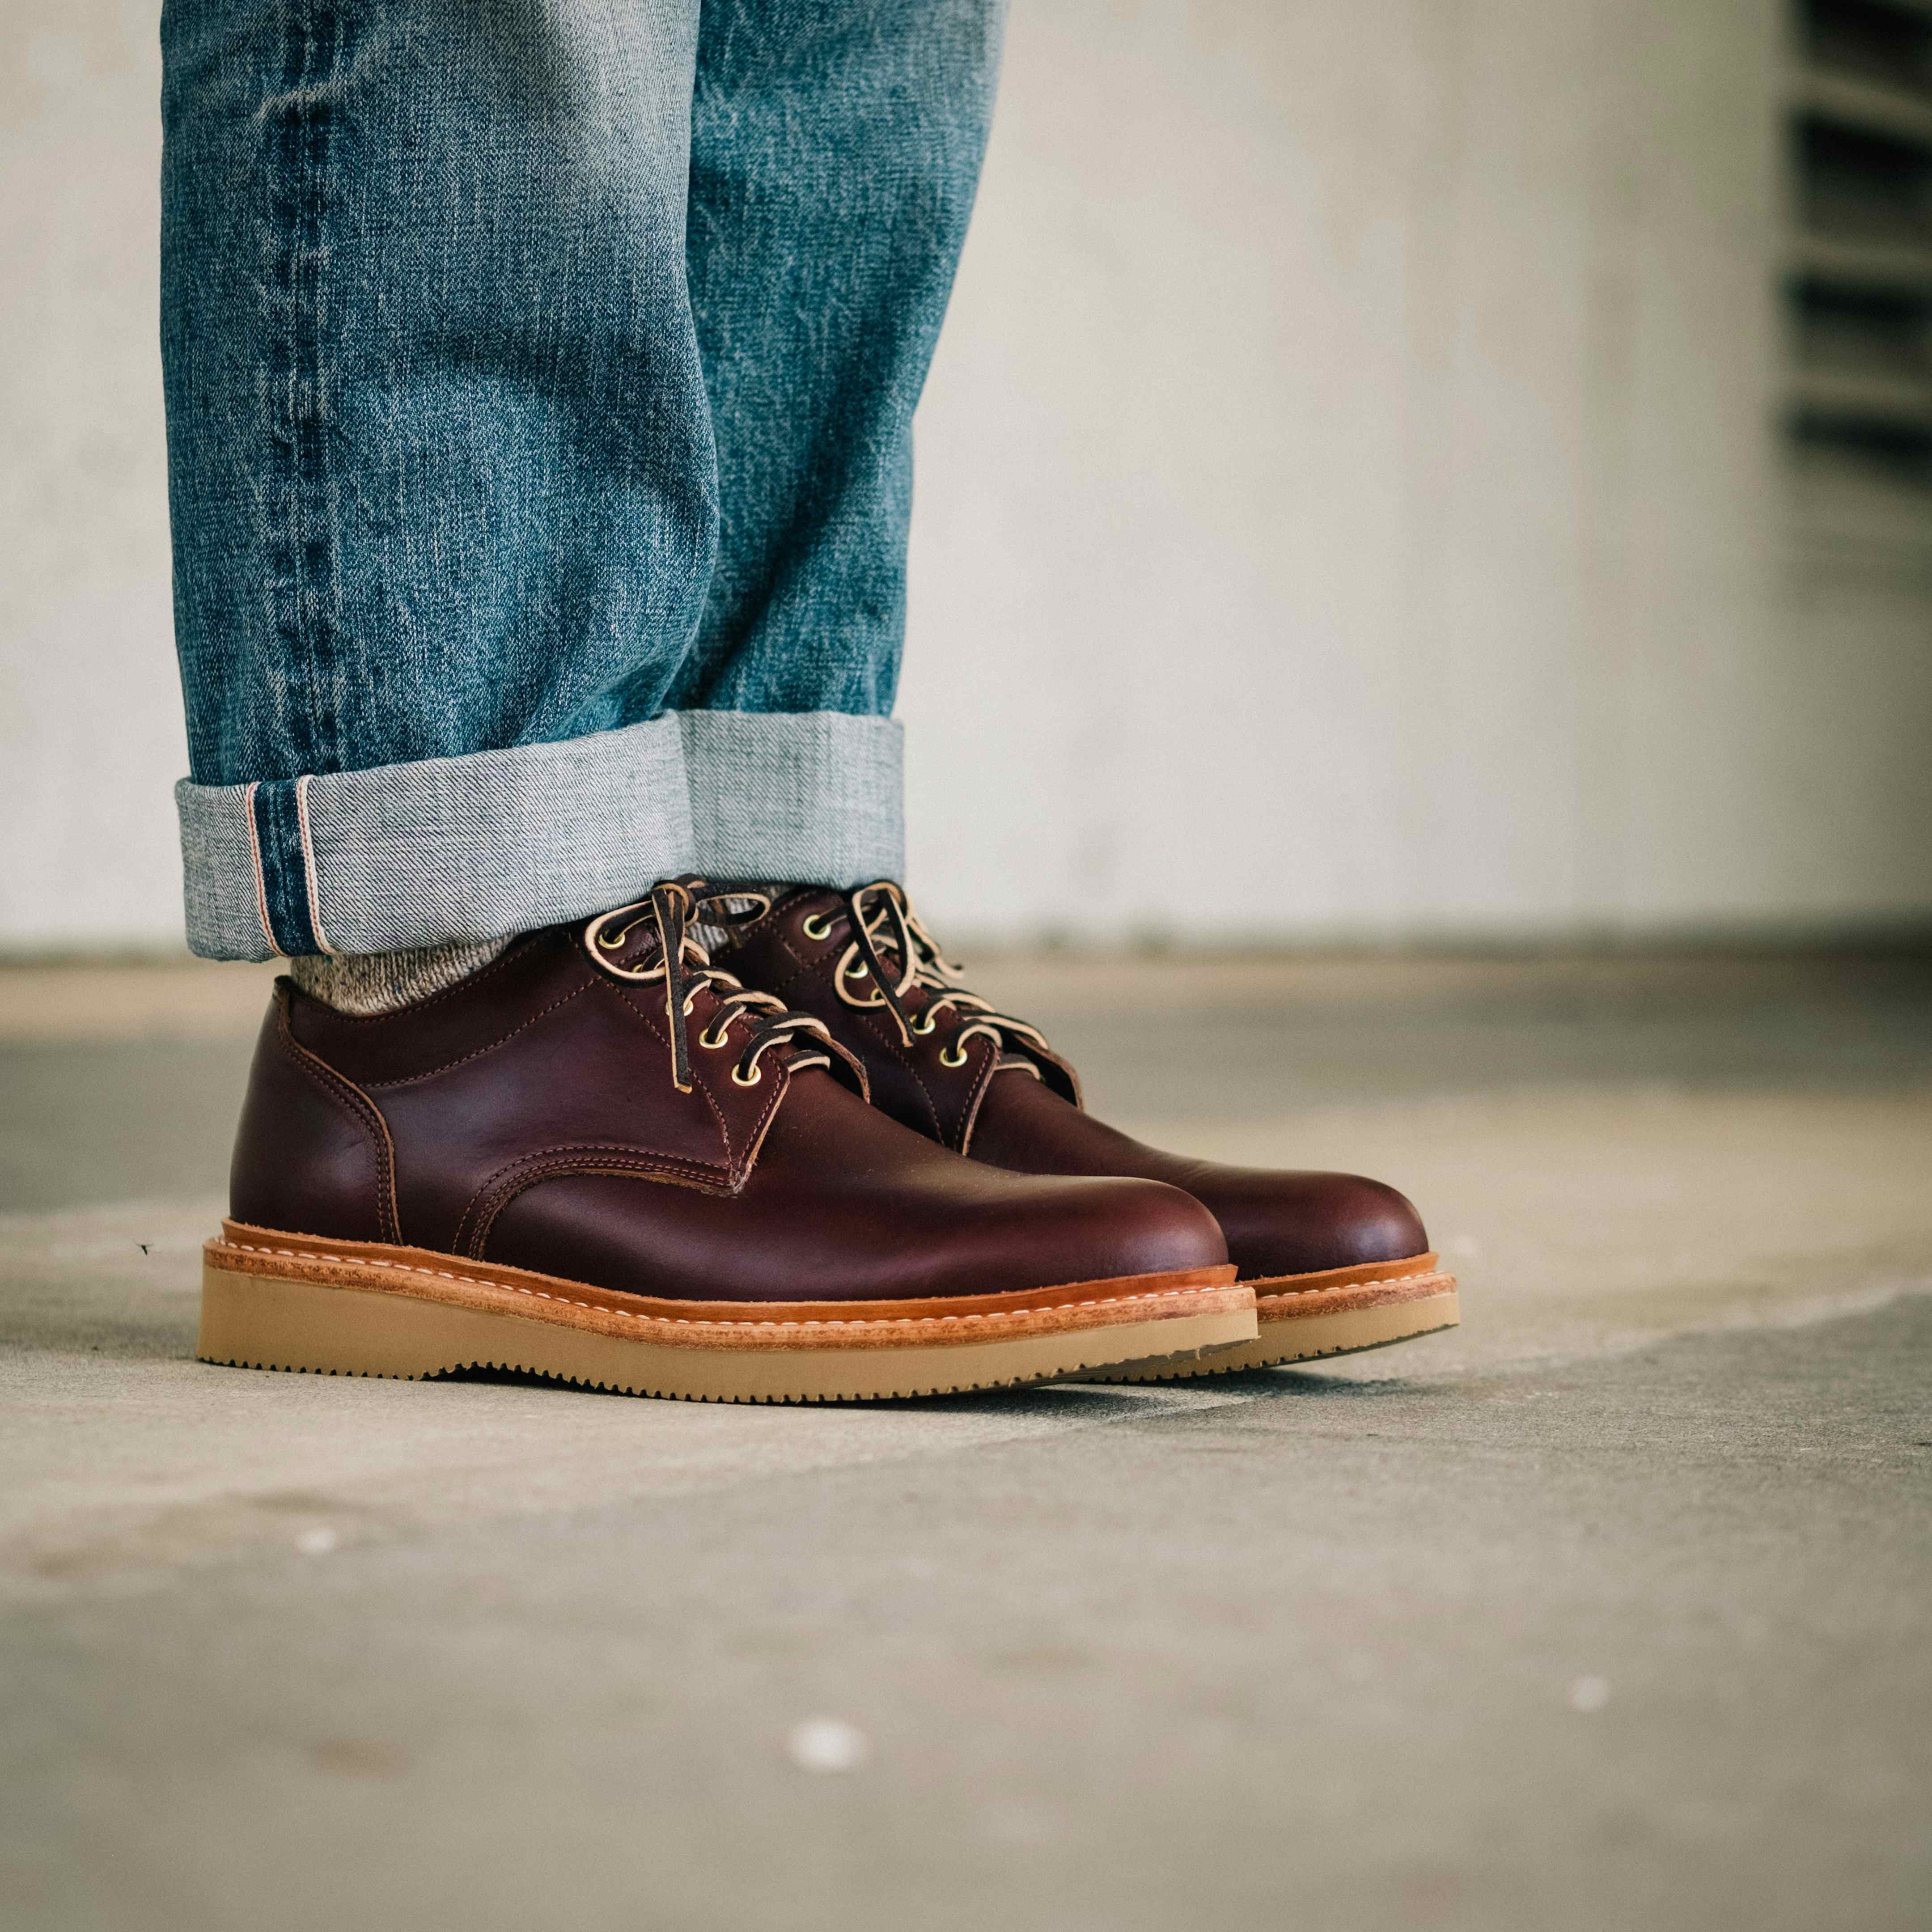 Trench Oxford - Color 8 Chromexcel, Vibram 2060 Sole - Made in | Oak ...